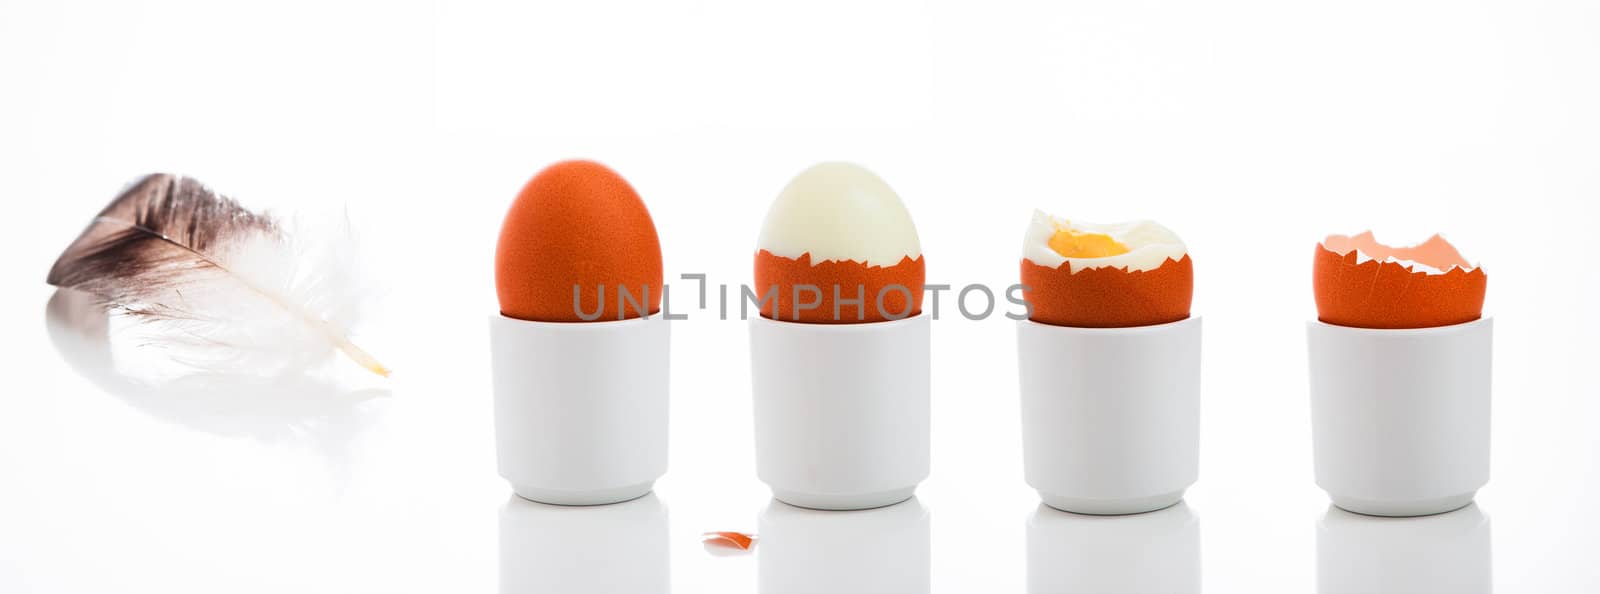 Egg collection on white background